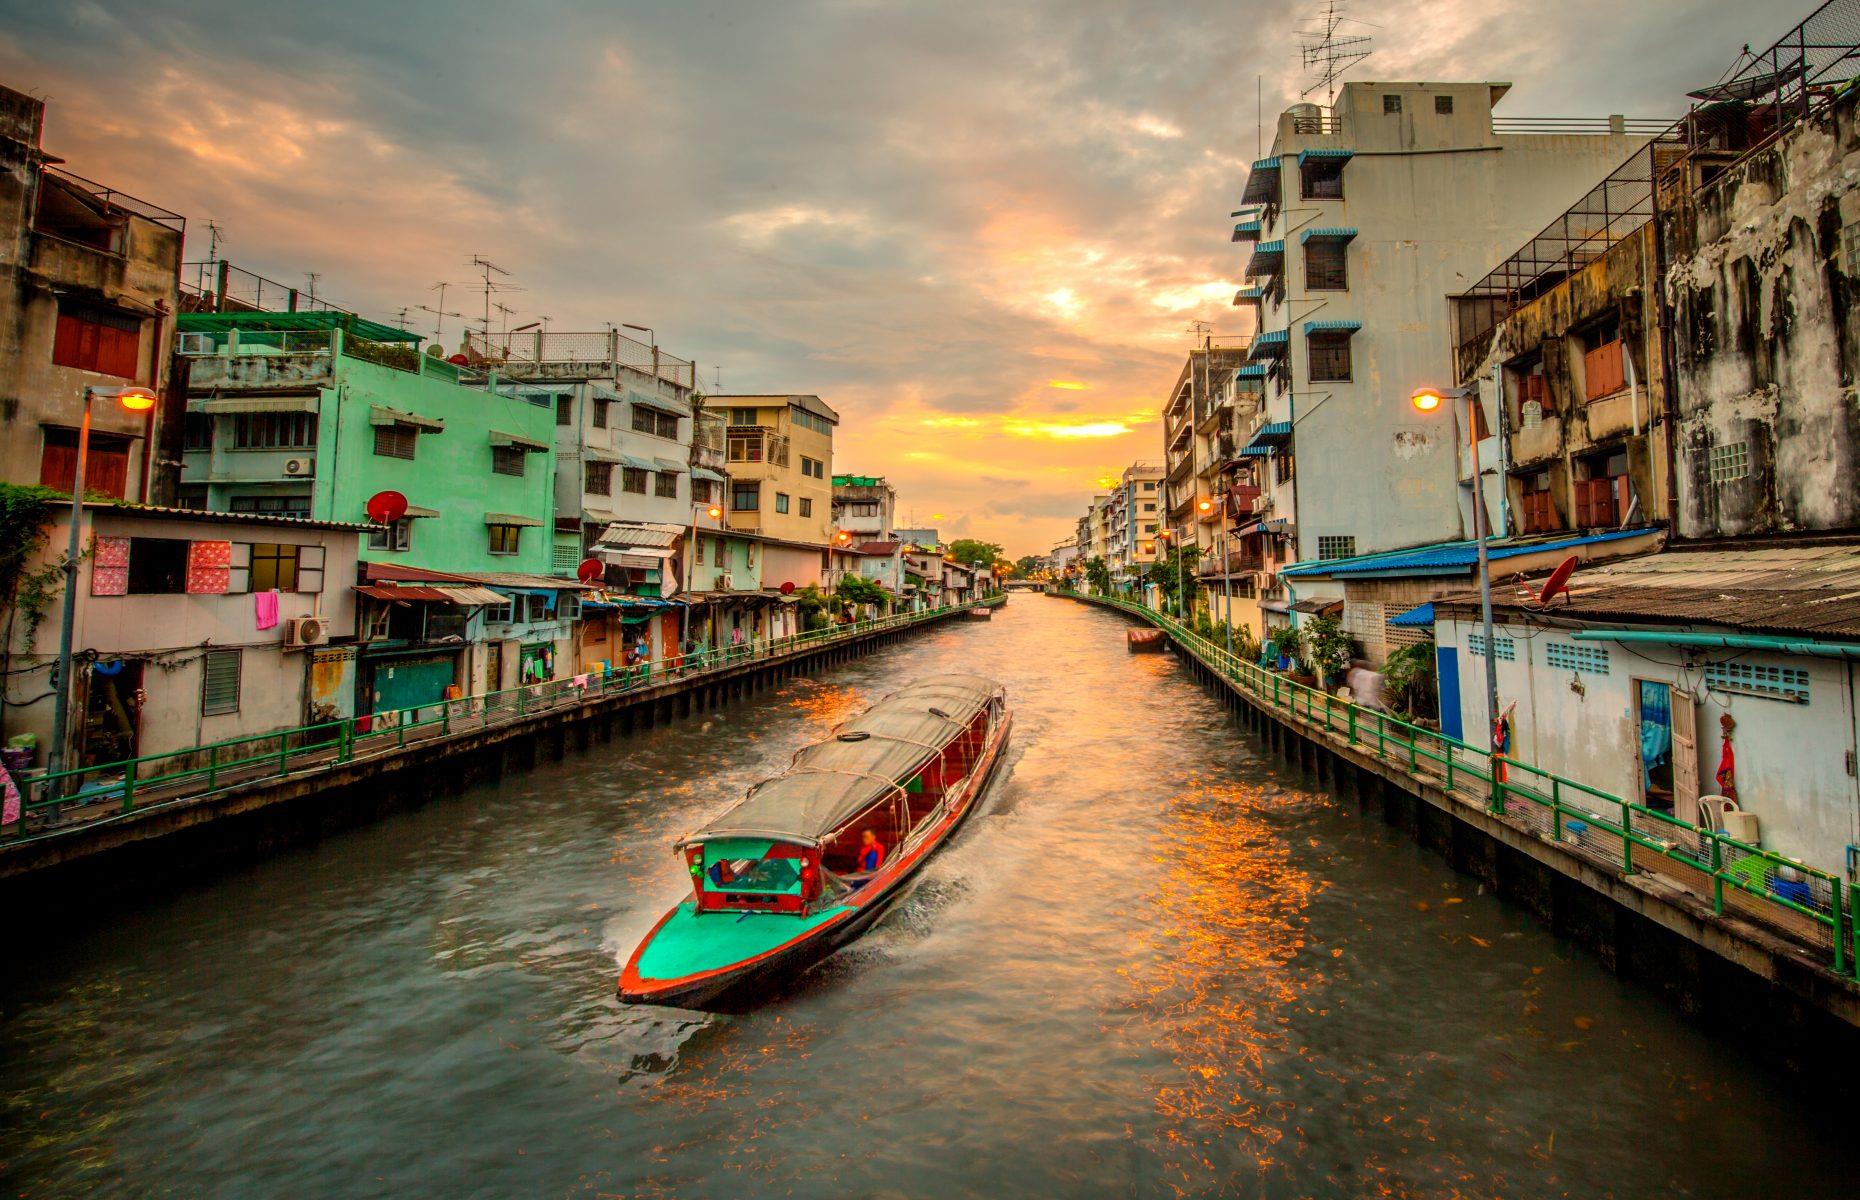 One of Thailand’s most iconic waterways, the Khlong Saen Saep flows through Bangkok from east to west. Beginning in the city’s Old Town, the canal journeys to the Chachoengsao province before flowing into the Bang PaKong River and is connected to smaller canals throughout the city. With its pretty boats trailing through central Bangkok and ornate Italian Bridges framing the water, the Saen Saep is one of the easiest and most picturesque ways to travel through the city.